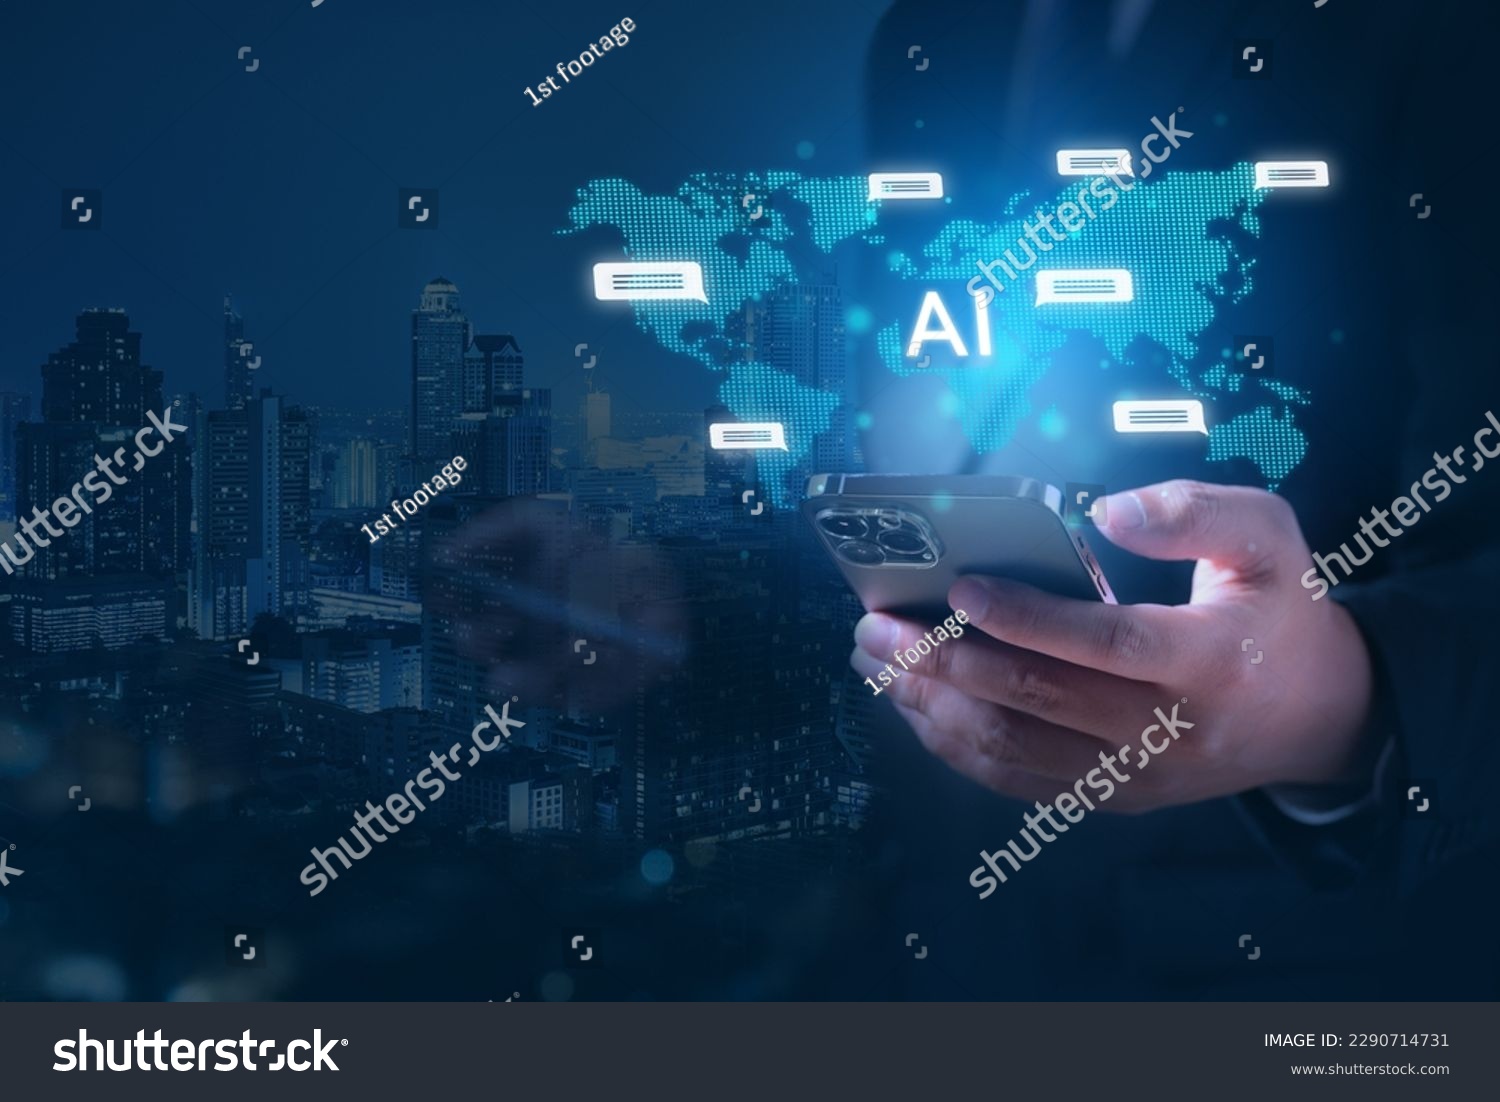 AI Chat Artificial Intelligence, AI language model, Technology Innovation, Brain representing artificial intelligence, Digital transformation concept, Human and technology #2290714731